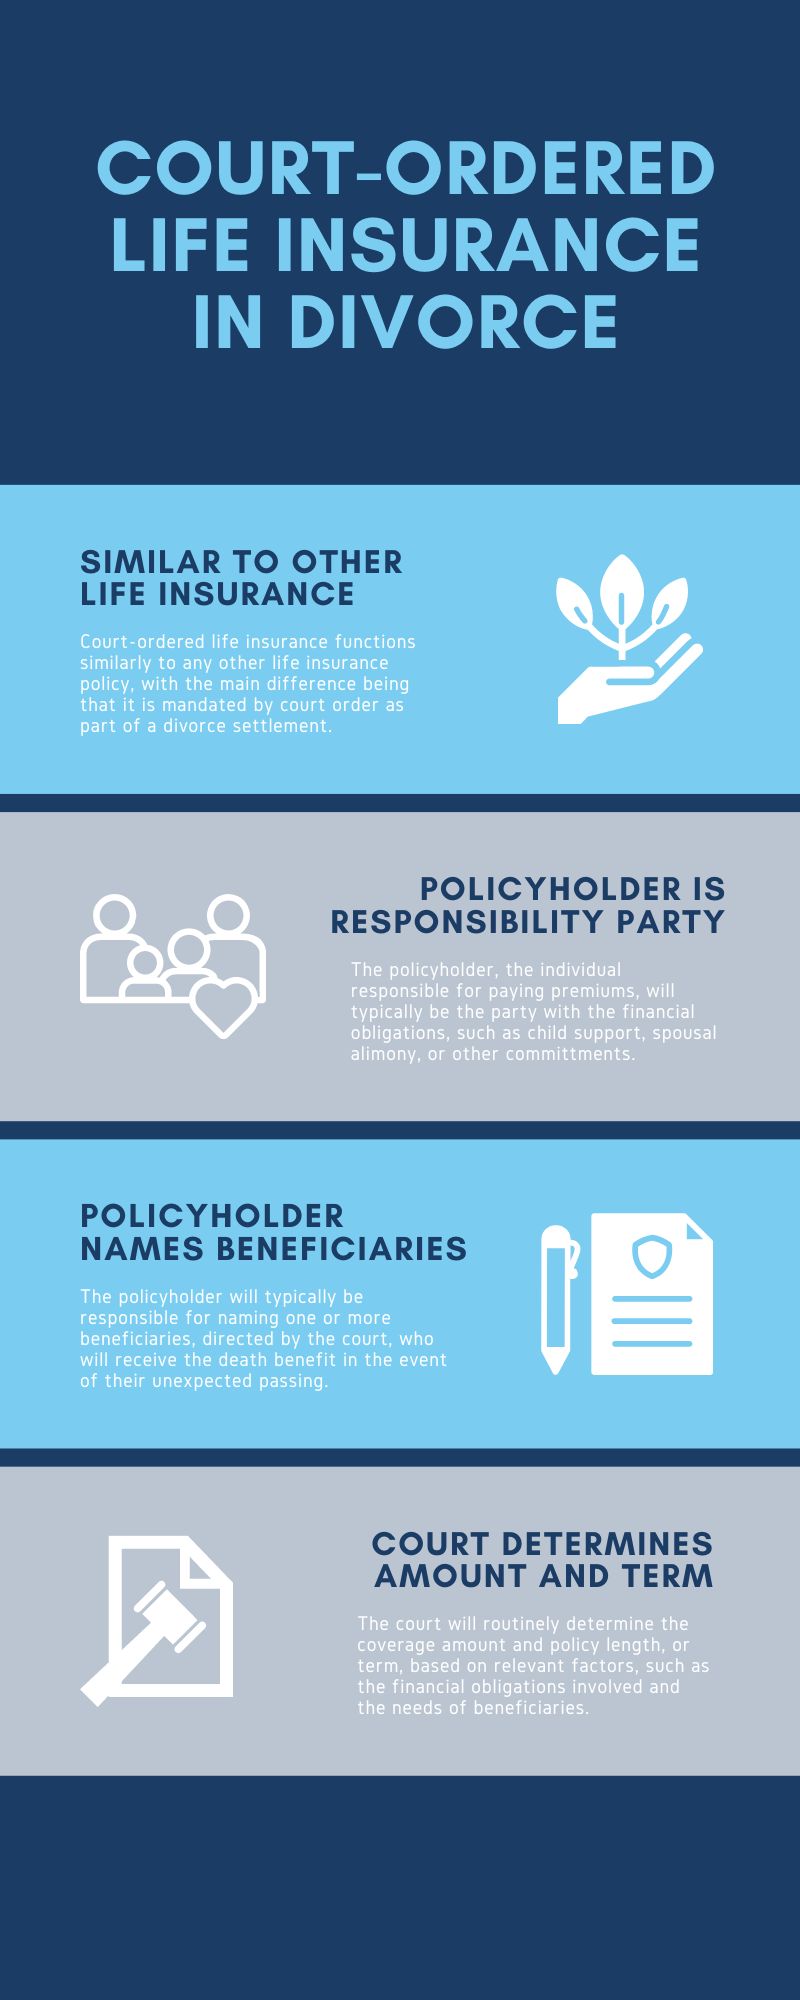 court-ordered life insurance in divorce infographic